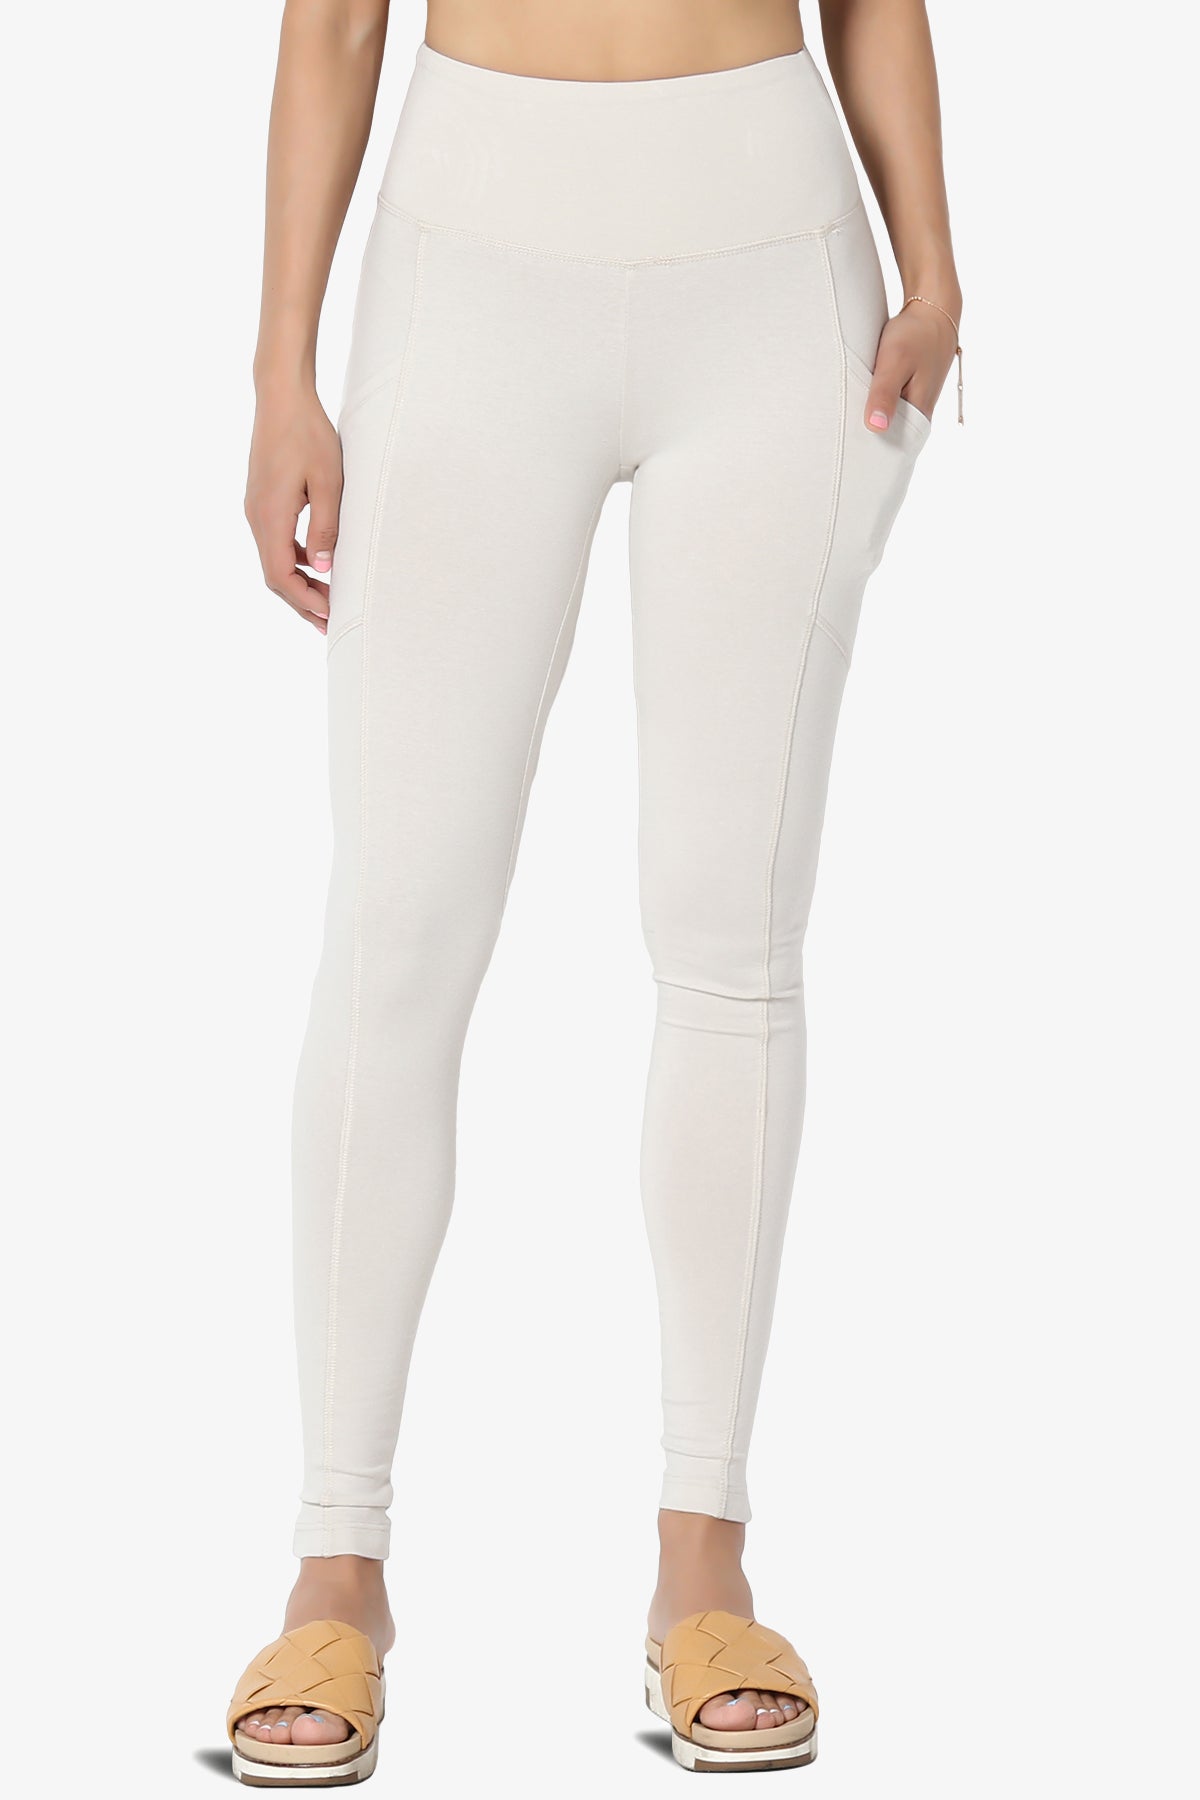 Ansley Luxe Cotton Leggings with Pockets BONE_3